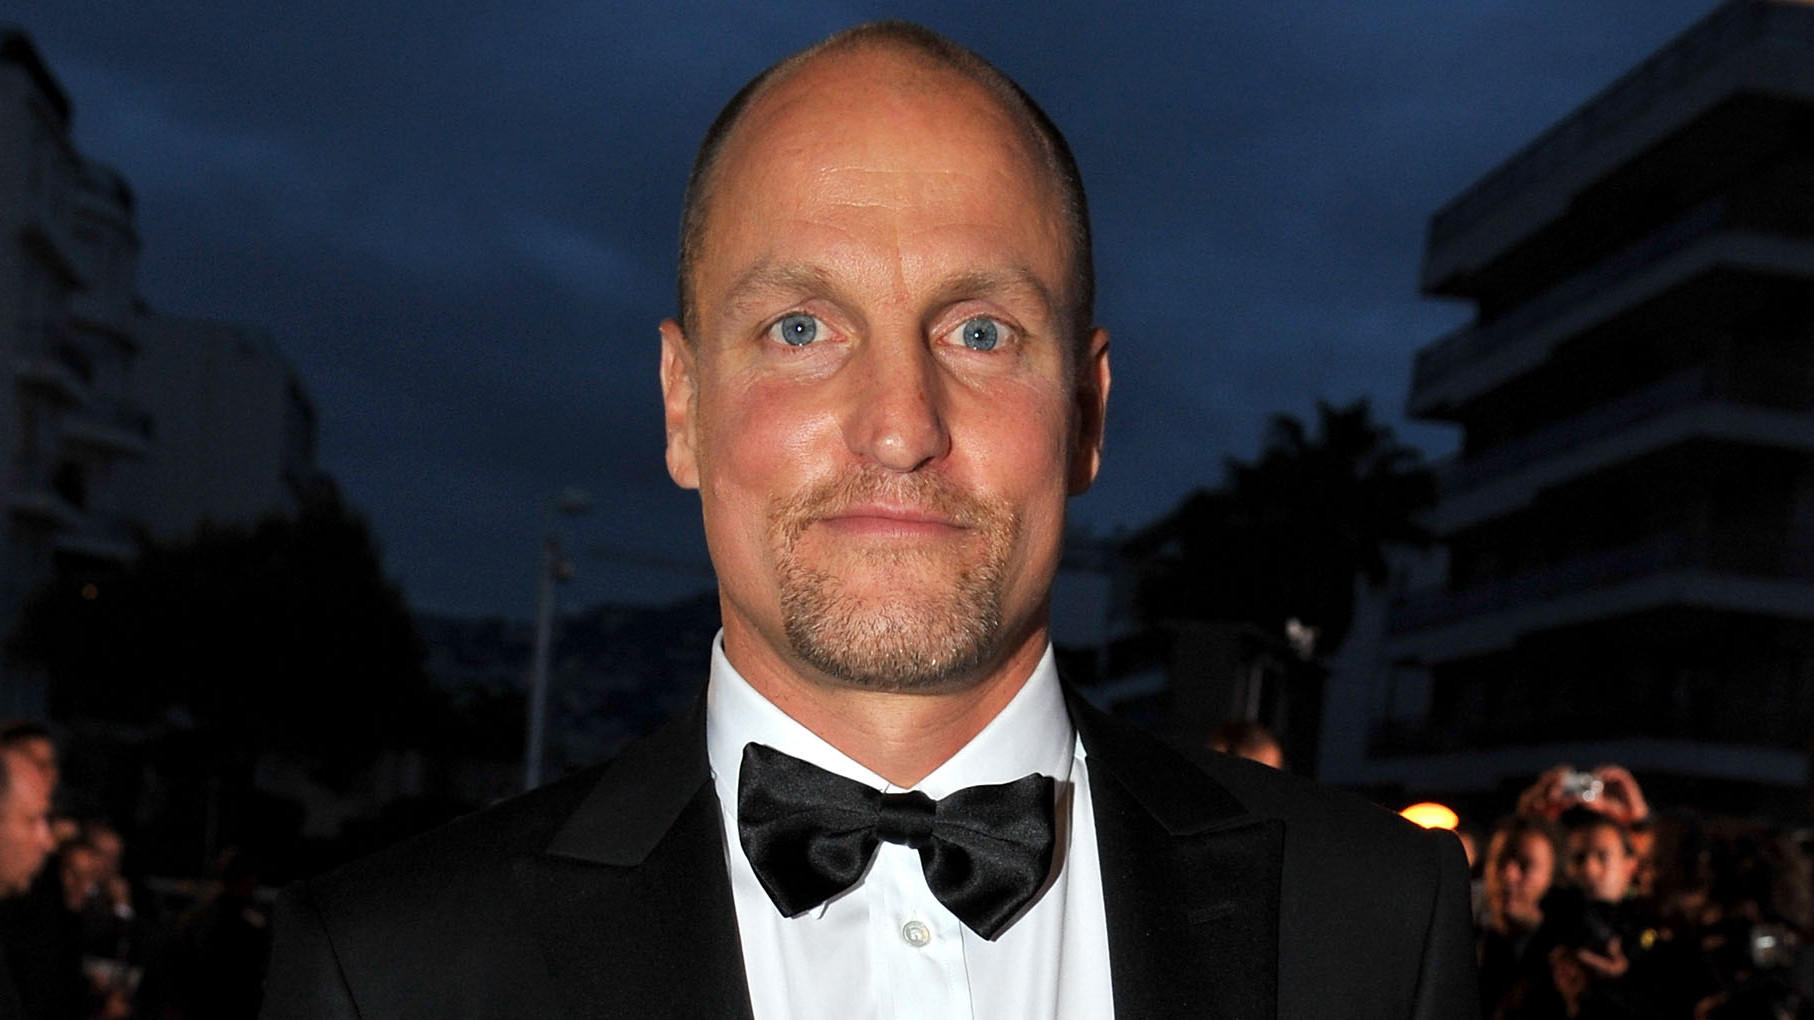 Woody Harrelson is NOW in Planet of the Apes sequel | The Movie Blog